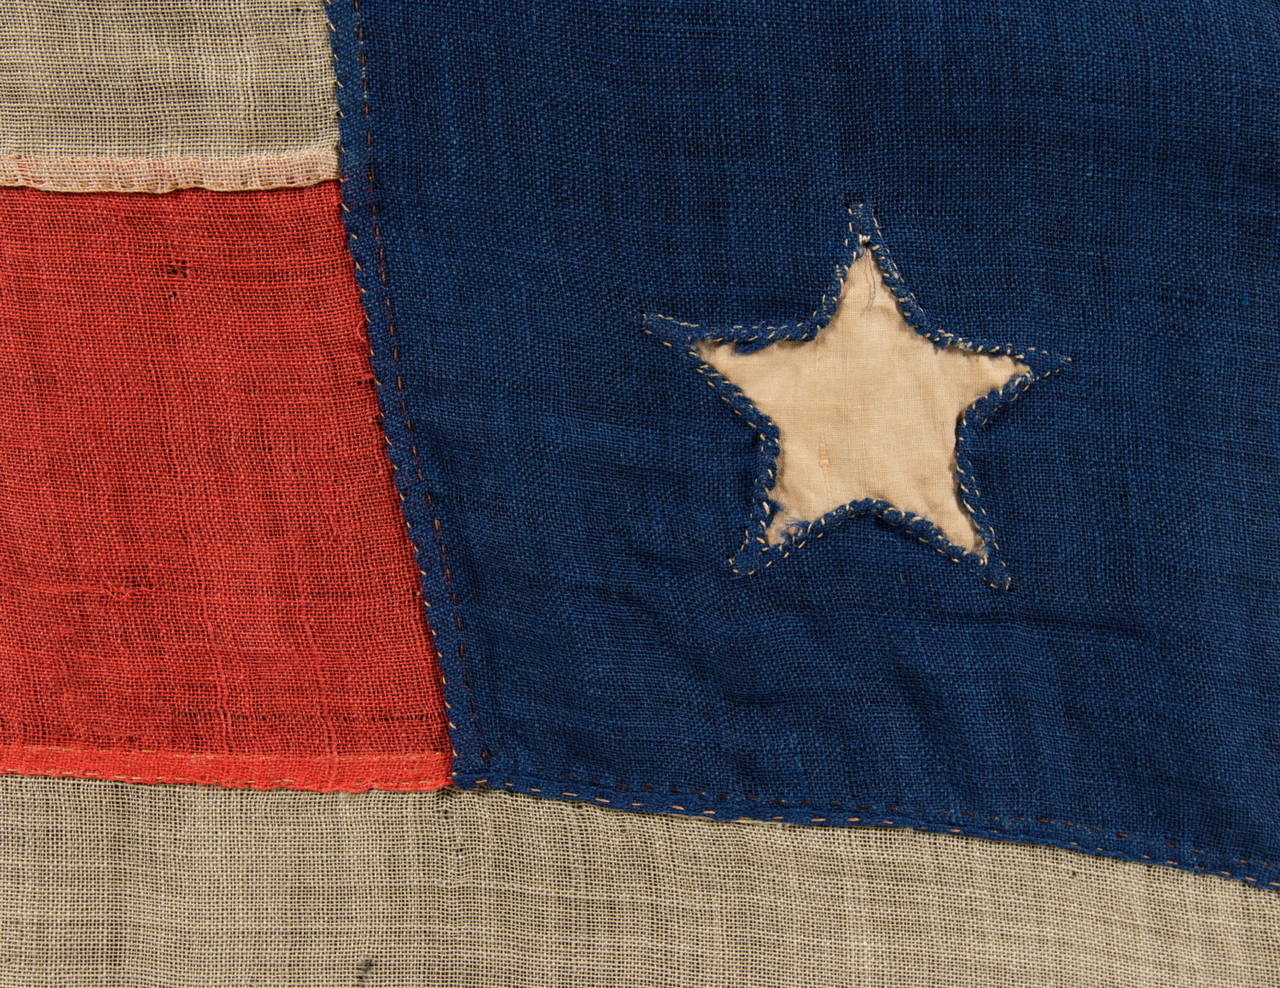 35 Star, Hand-Sewn, Single-Appliqued, Civil War Period American Flag In Good Condition In York County, PA